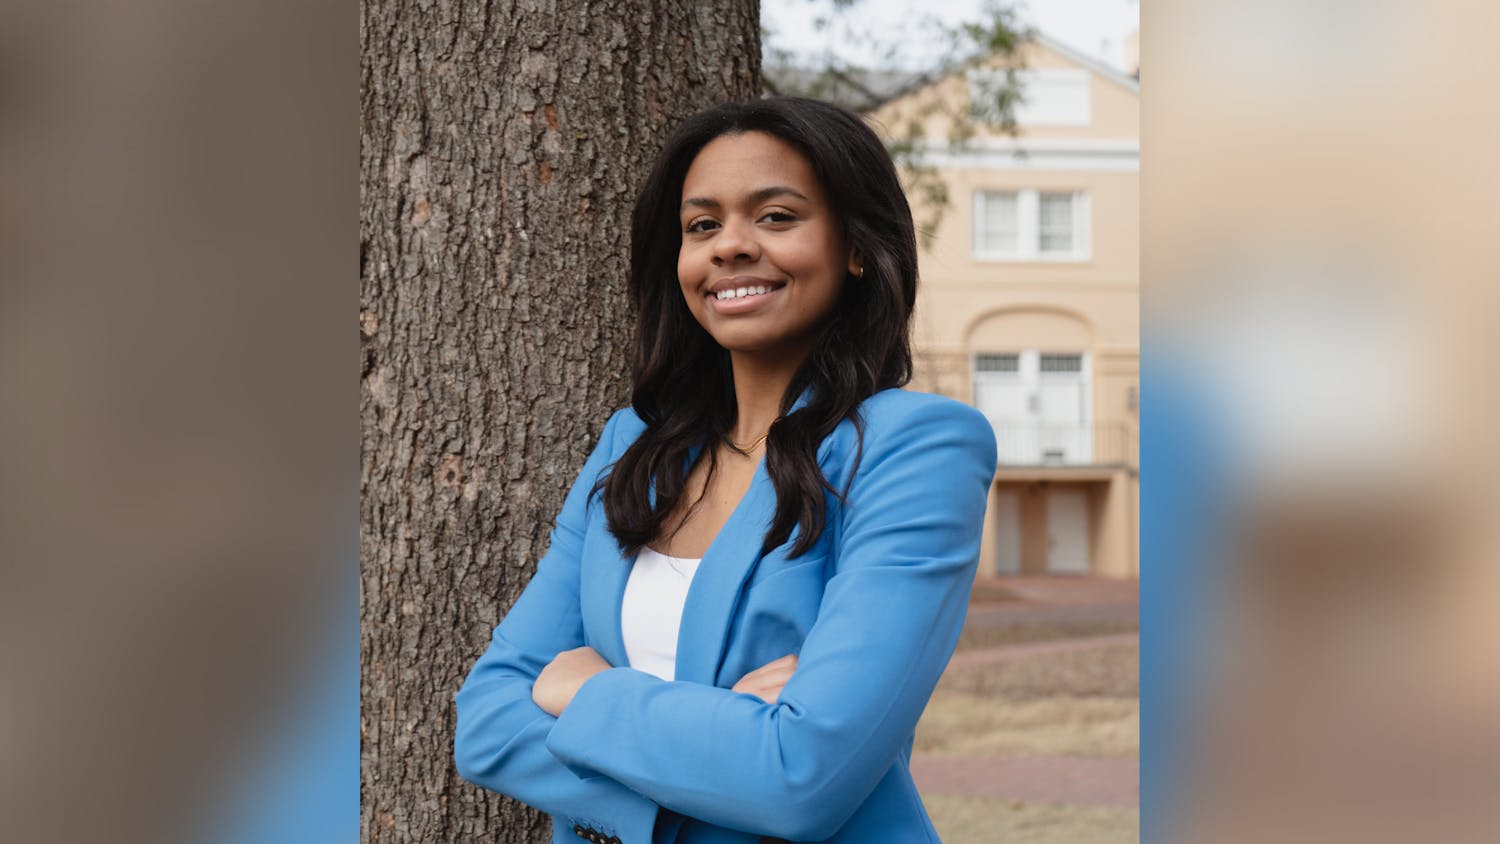 Abrianna Reaves is the only candidate running to be the next student body vice president. Students can vote for candidates from Feb. 21 at 9 a.m. to Feb. 22 at 5 p.m.&nbsp;